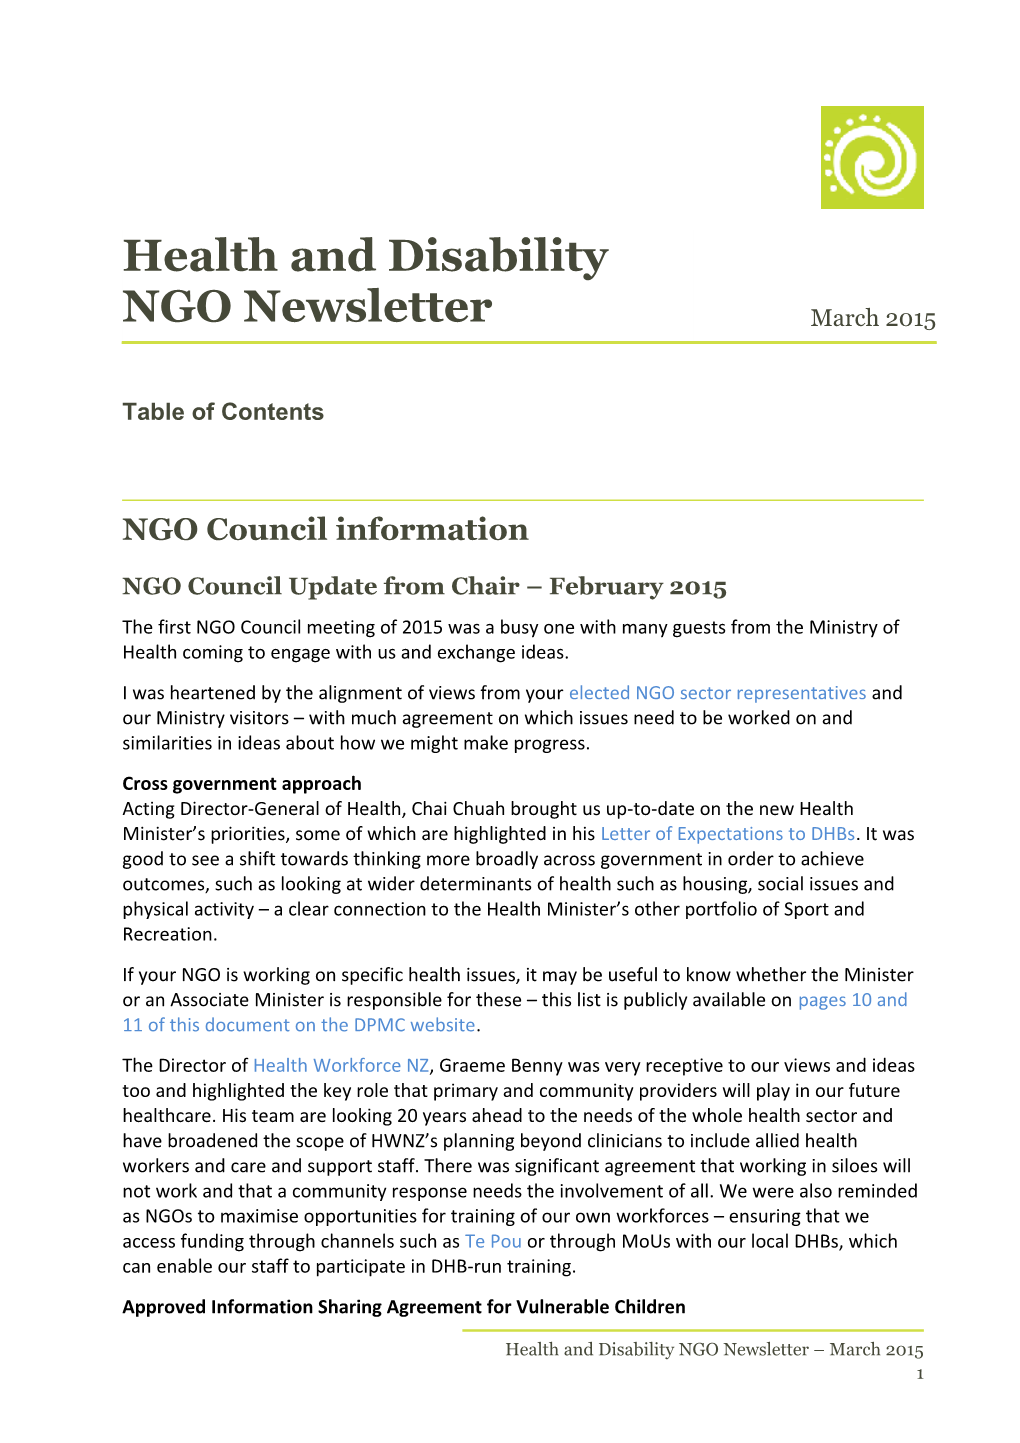 Health and Disability NGO Newsletter - August 2014 s1